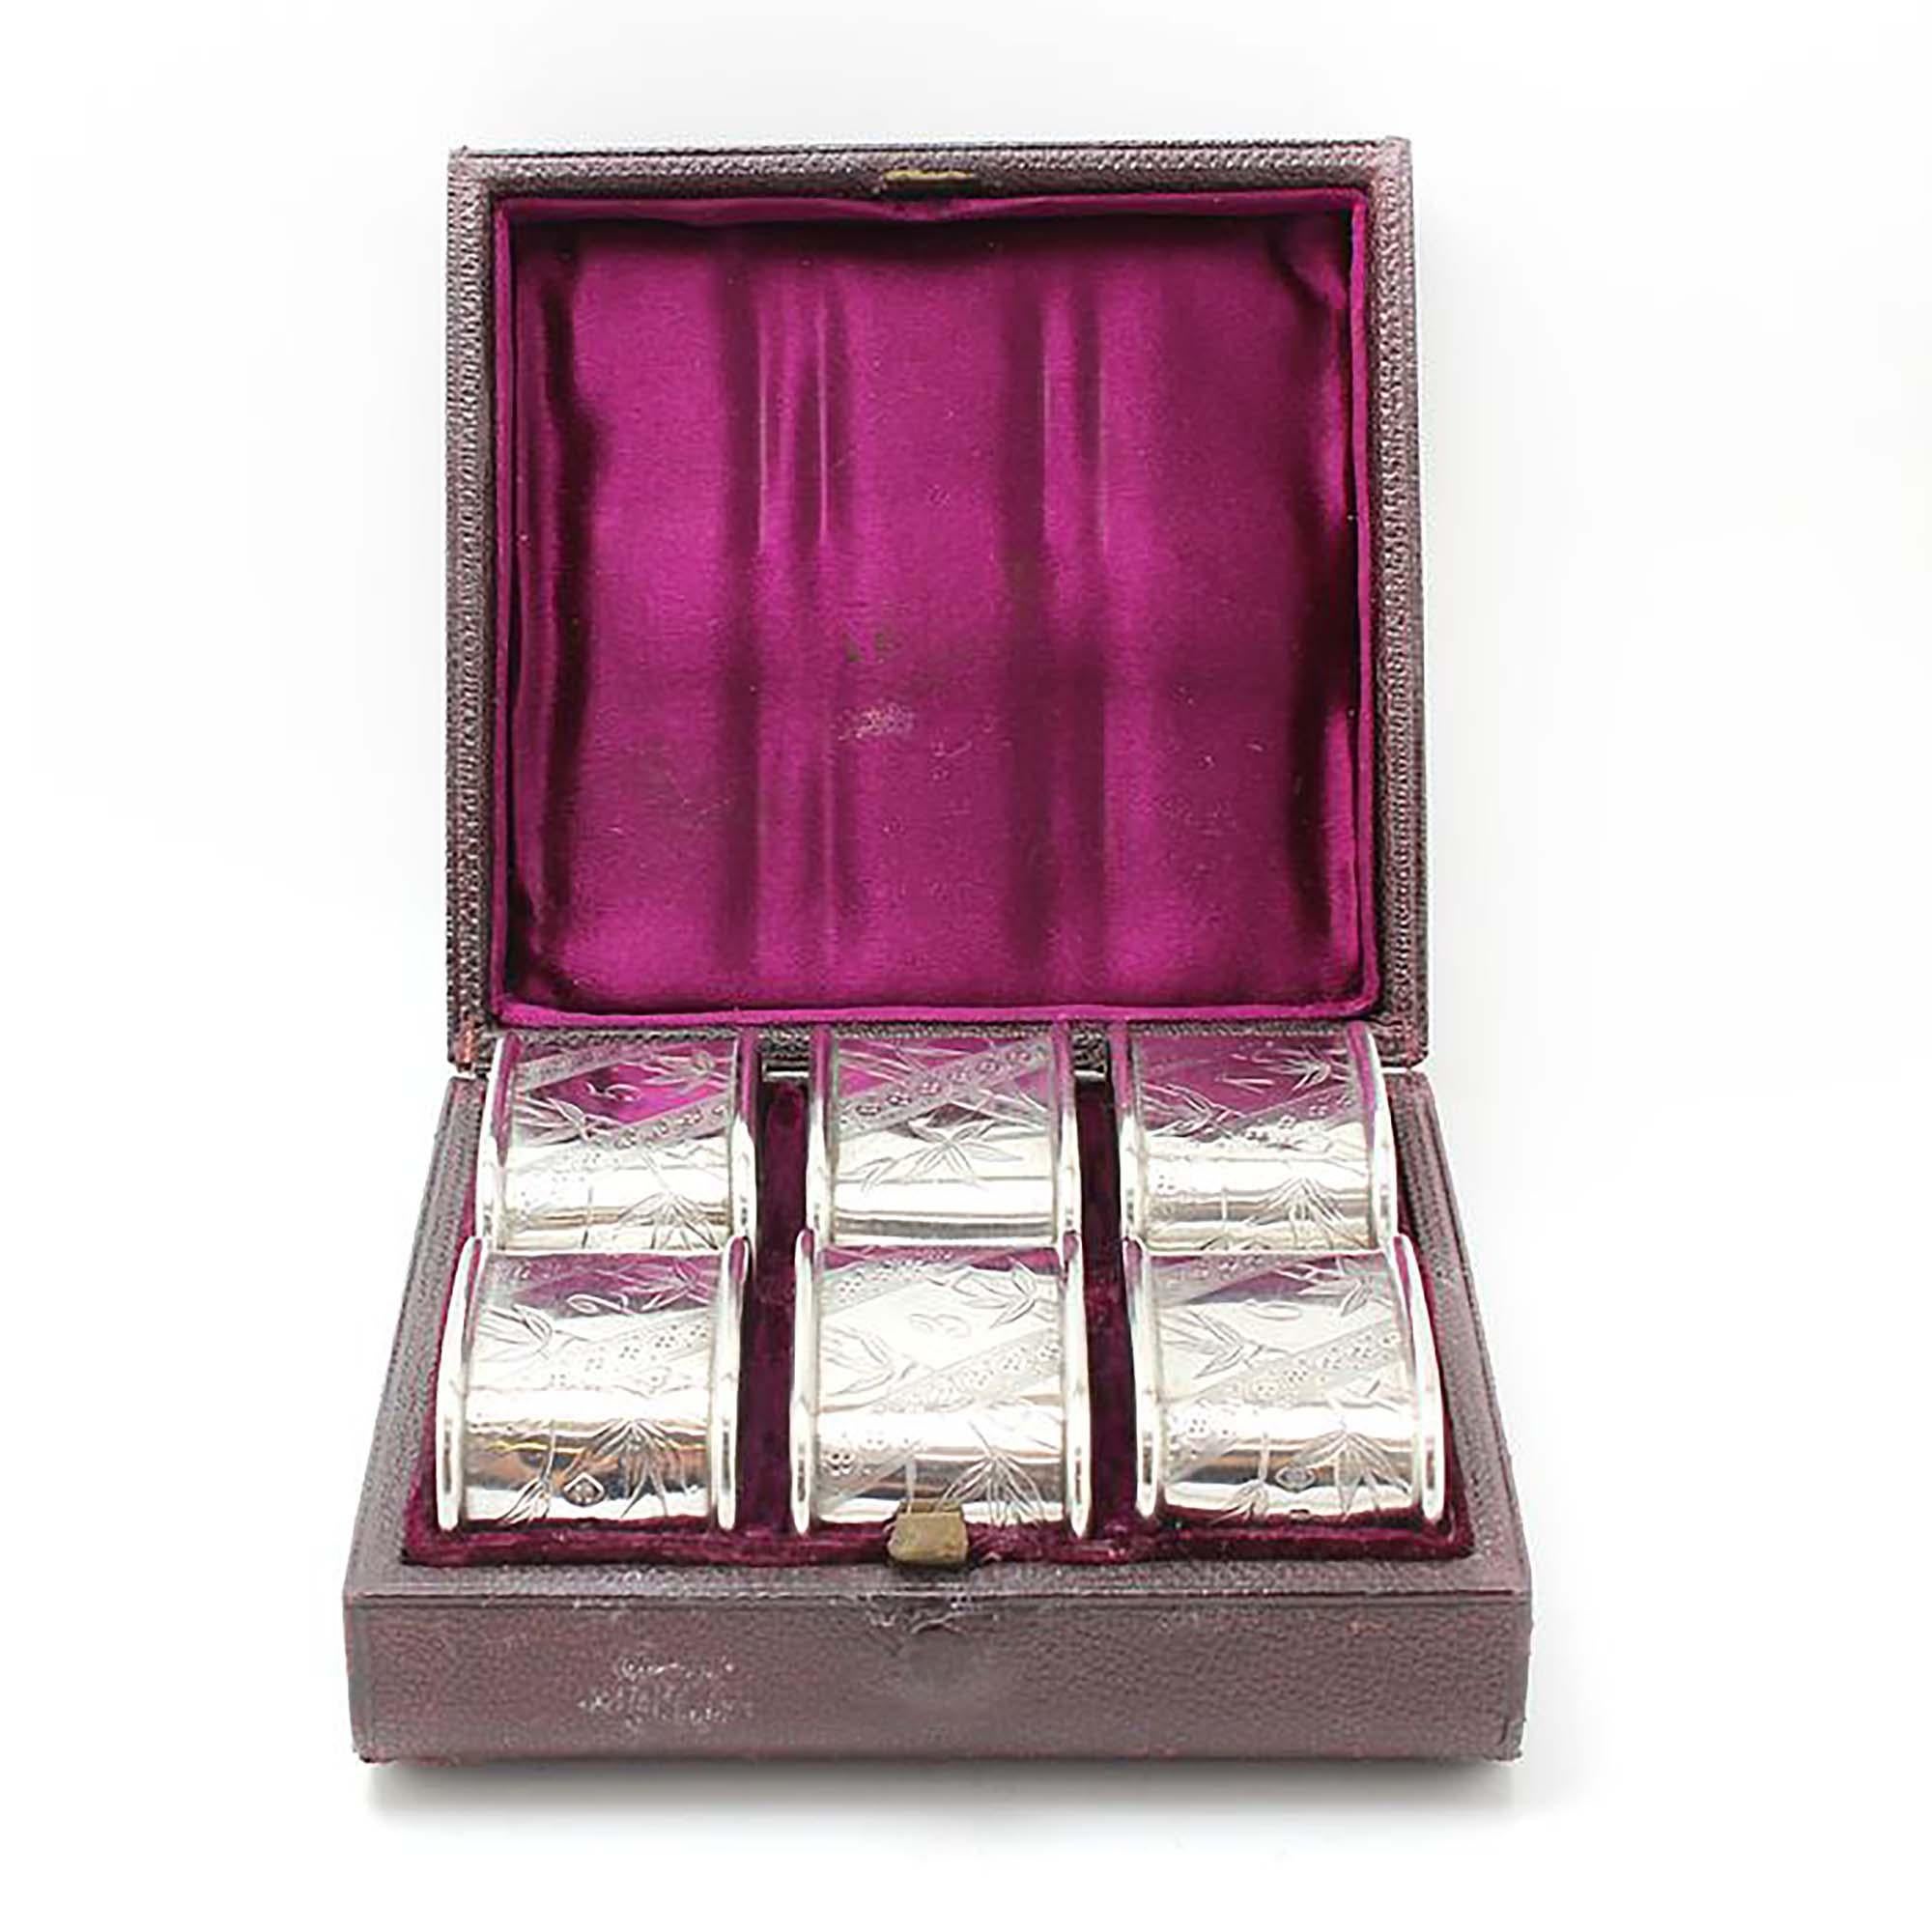 Antique Victorian sterling silver set of 6 unusual napkin rings.

 Decorated and engraved with various plant leaves. The napkin rings are also numbered with engravings 1 to 6.

They're not just for decoration! These are the perfect way to keep